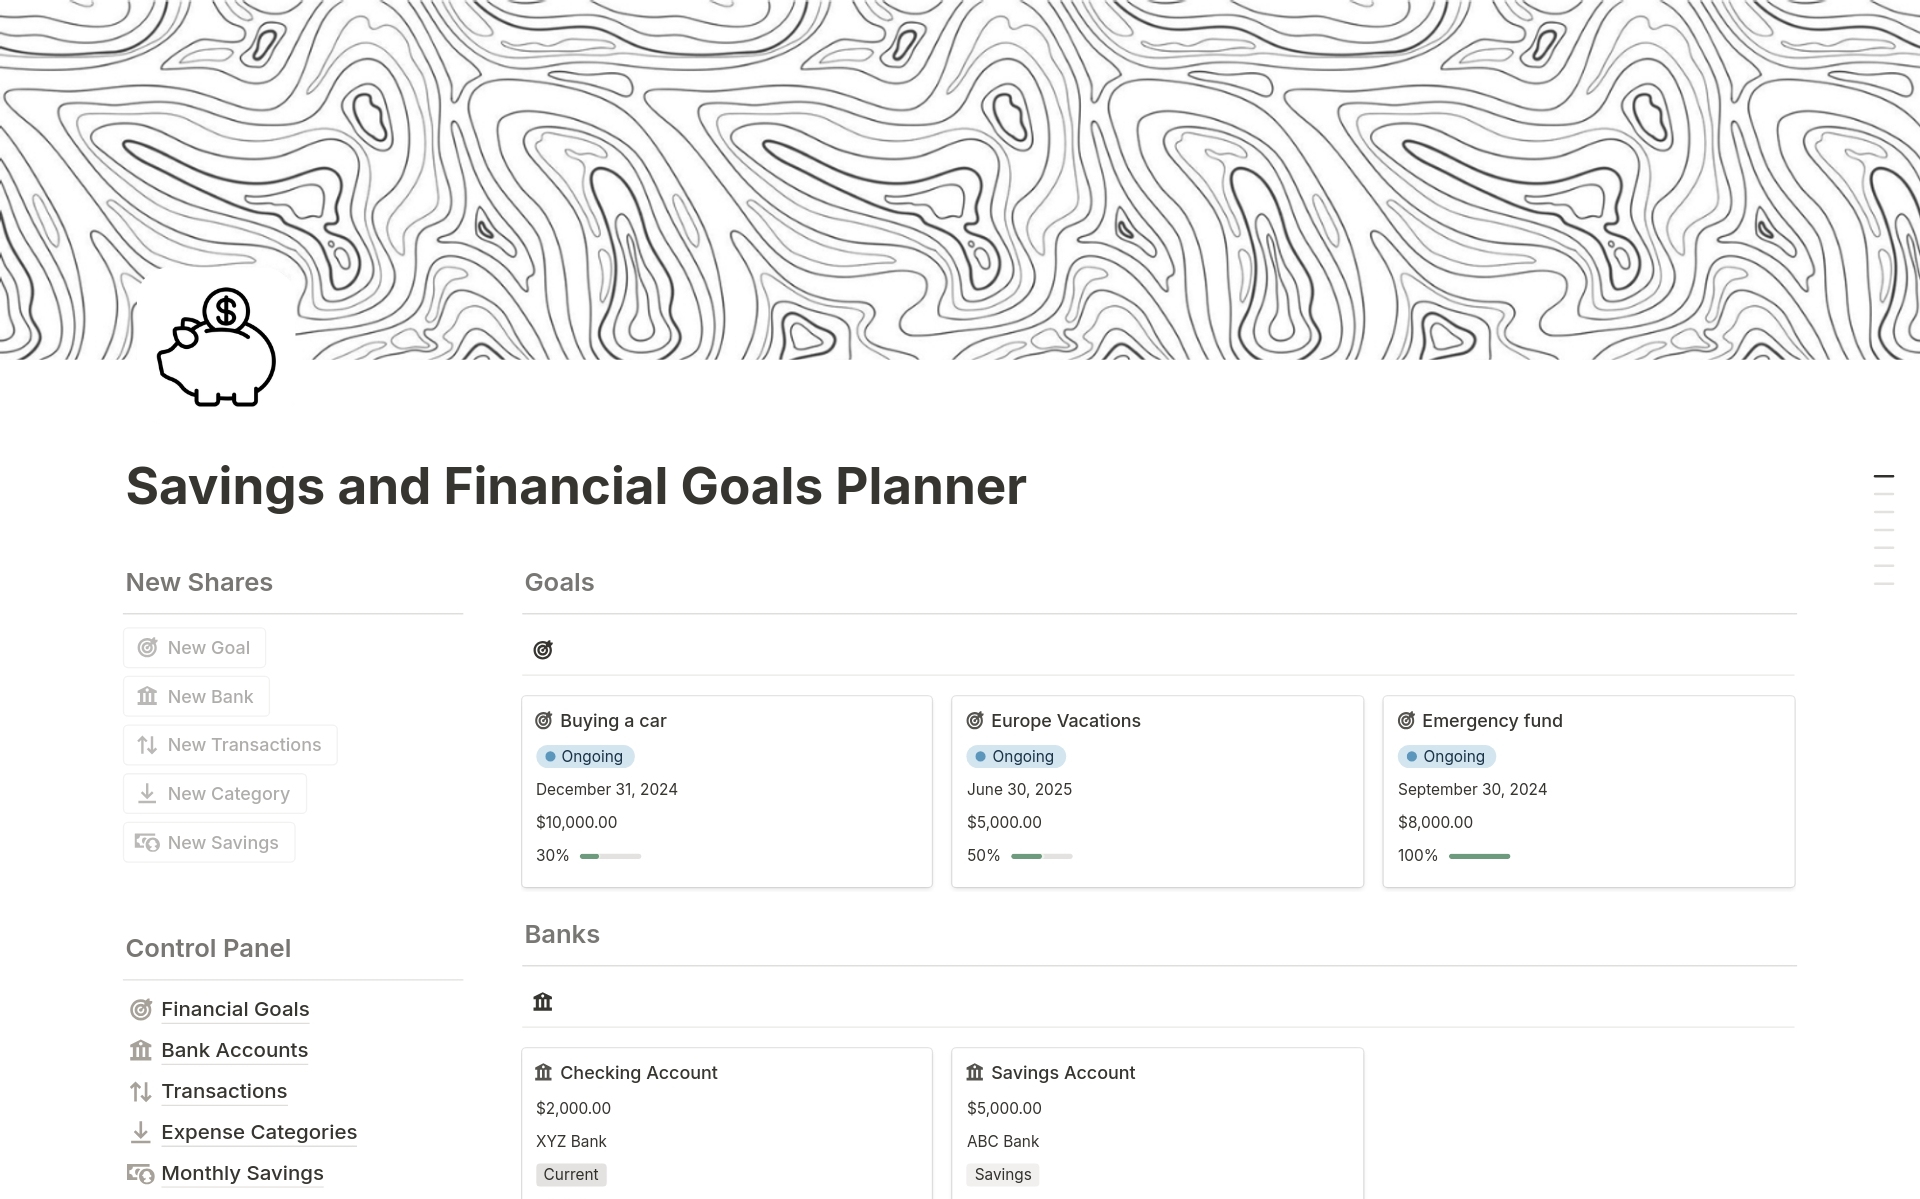 Achieve your savings goals with our Notion template. Easily plan and monitor your financial goals.